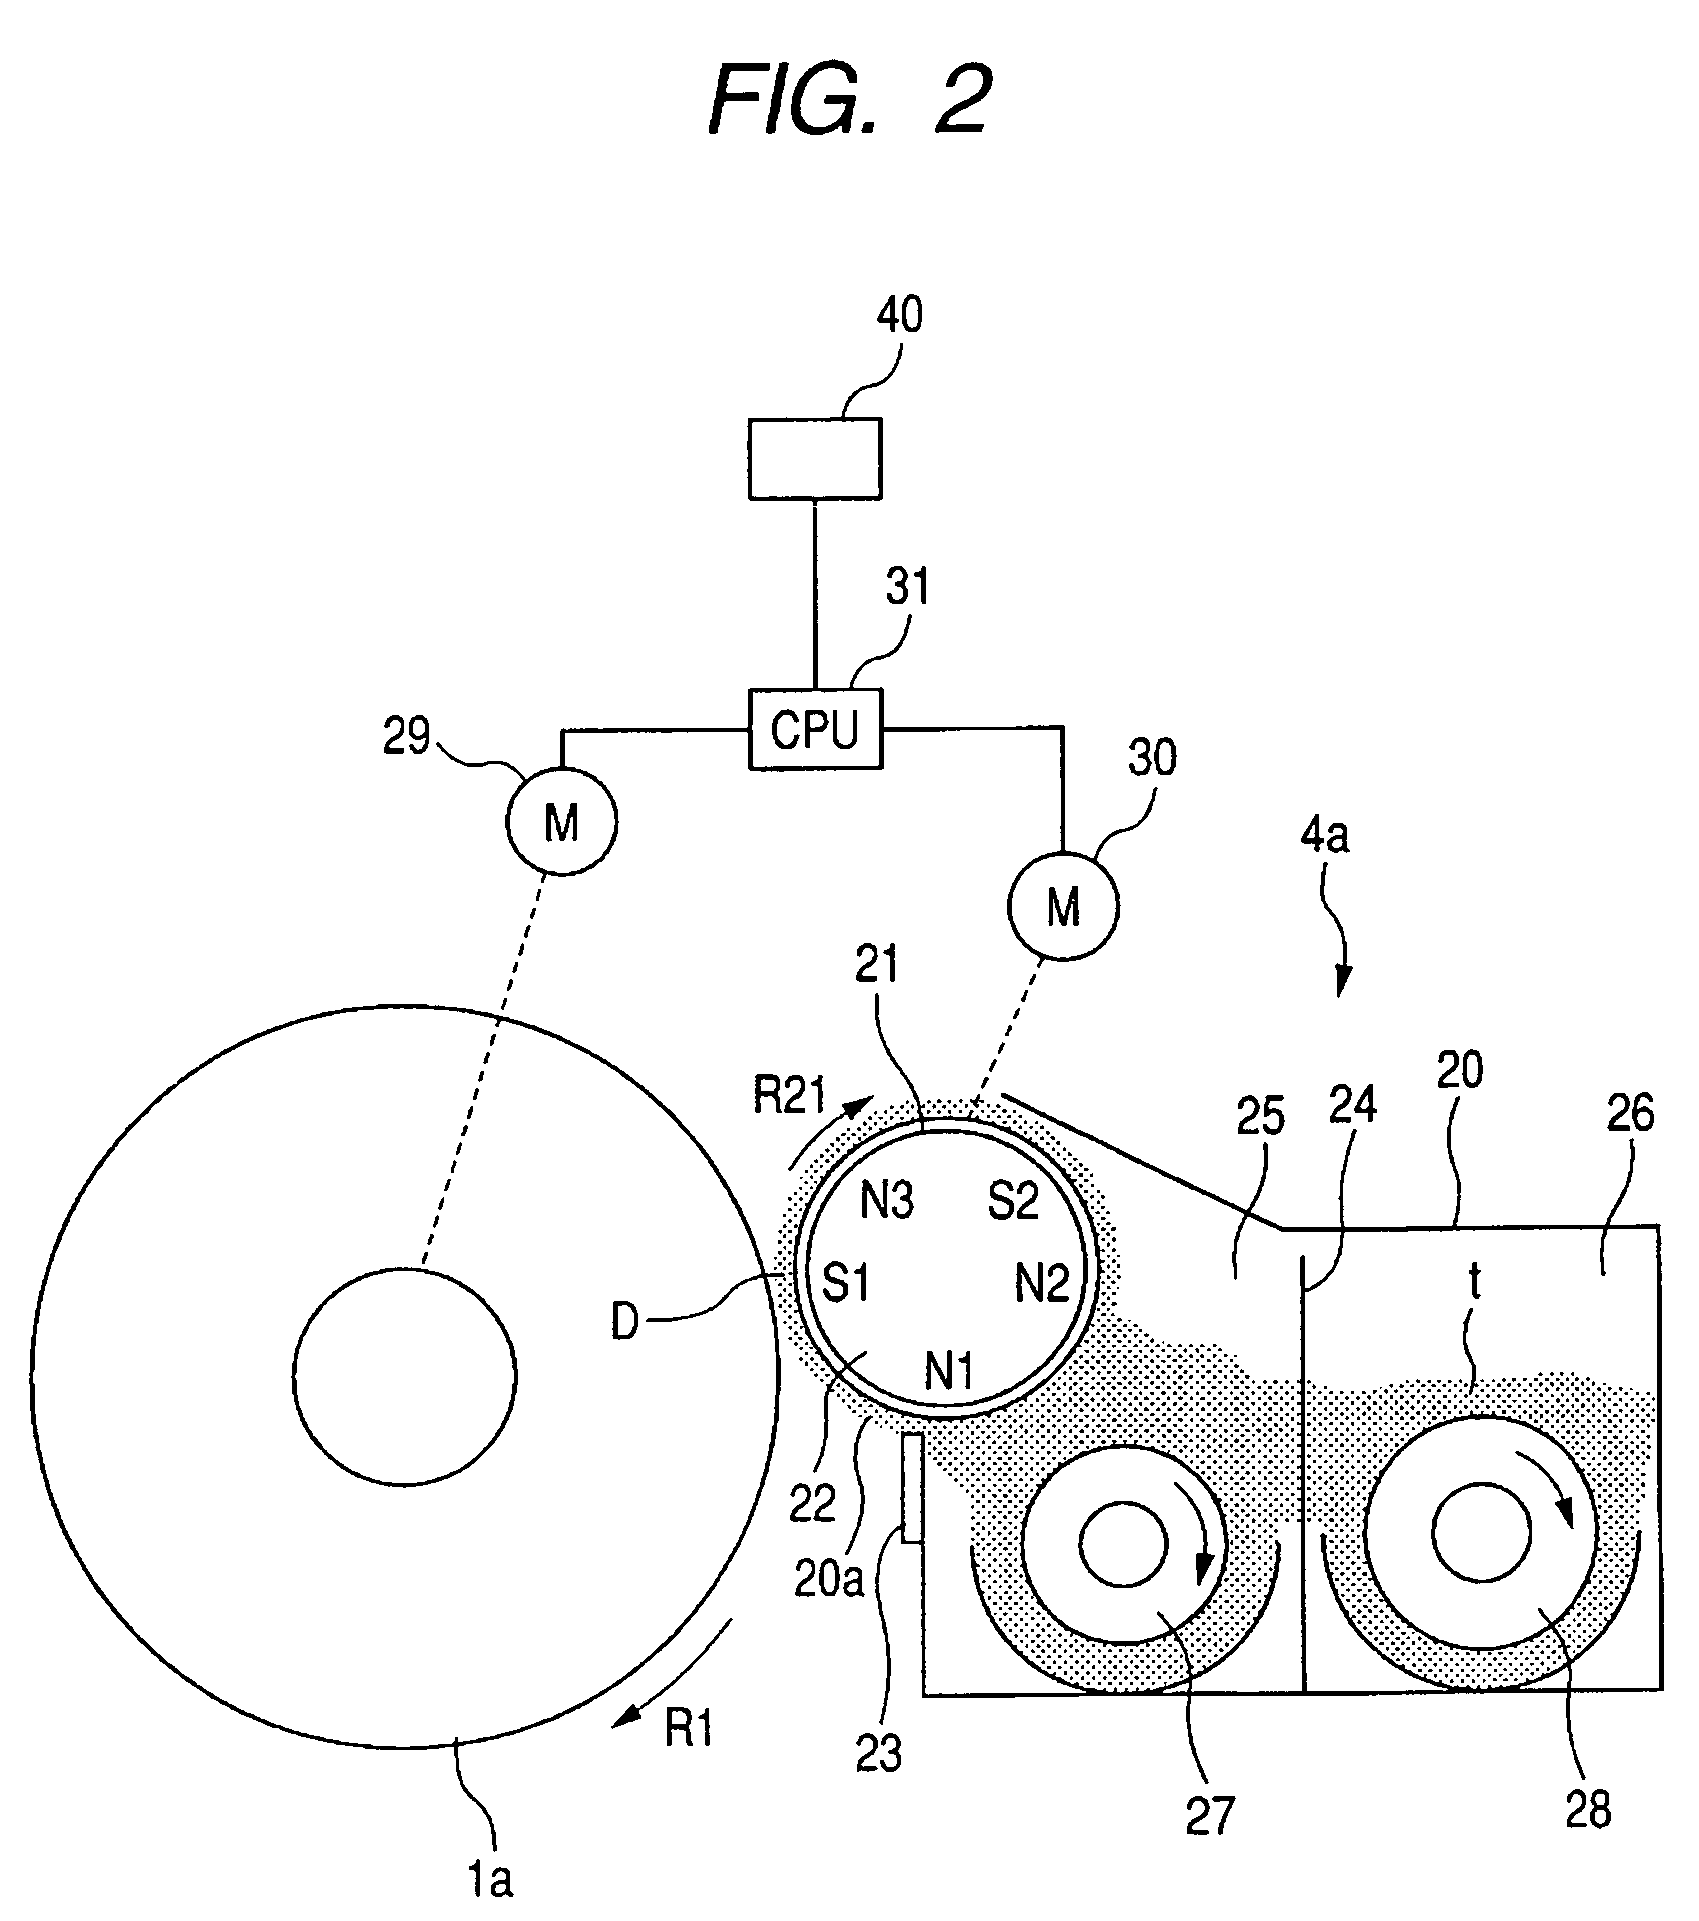 Image forming apparatus wherein a speed of a developed carrying member is controlled relative to a speed of an image bearing member